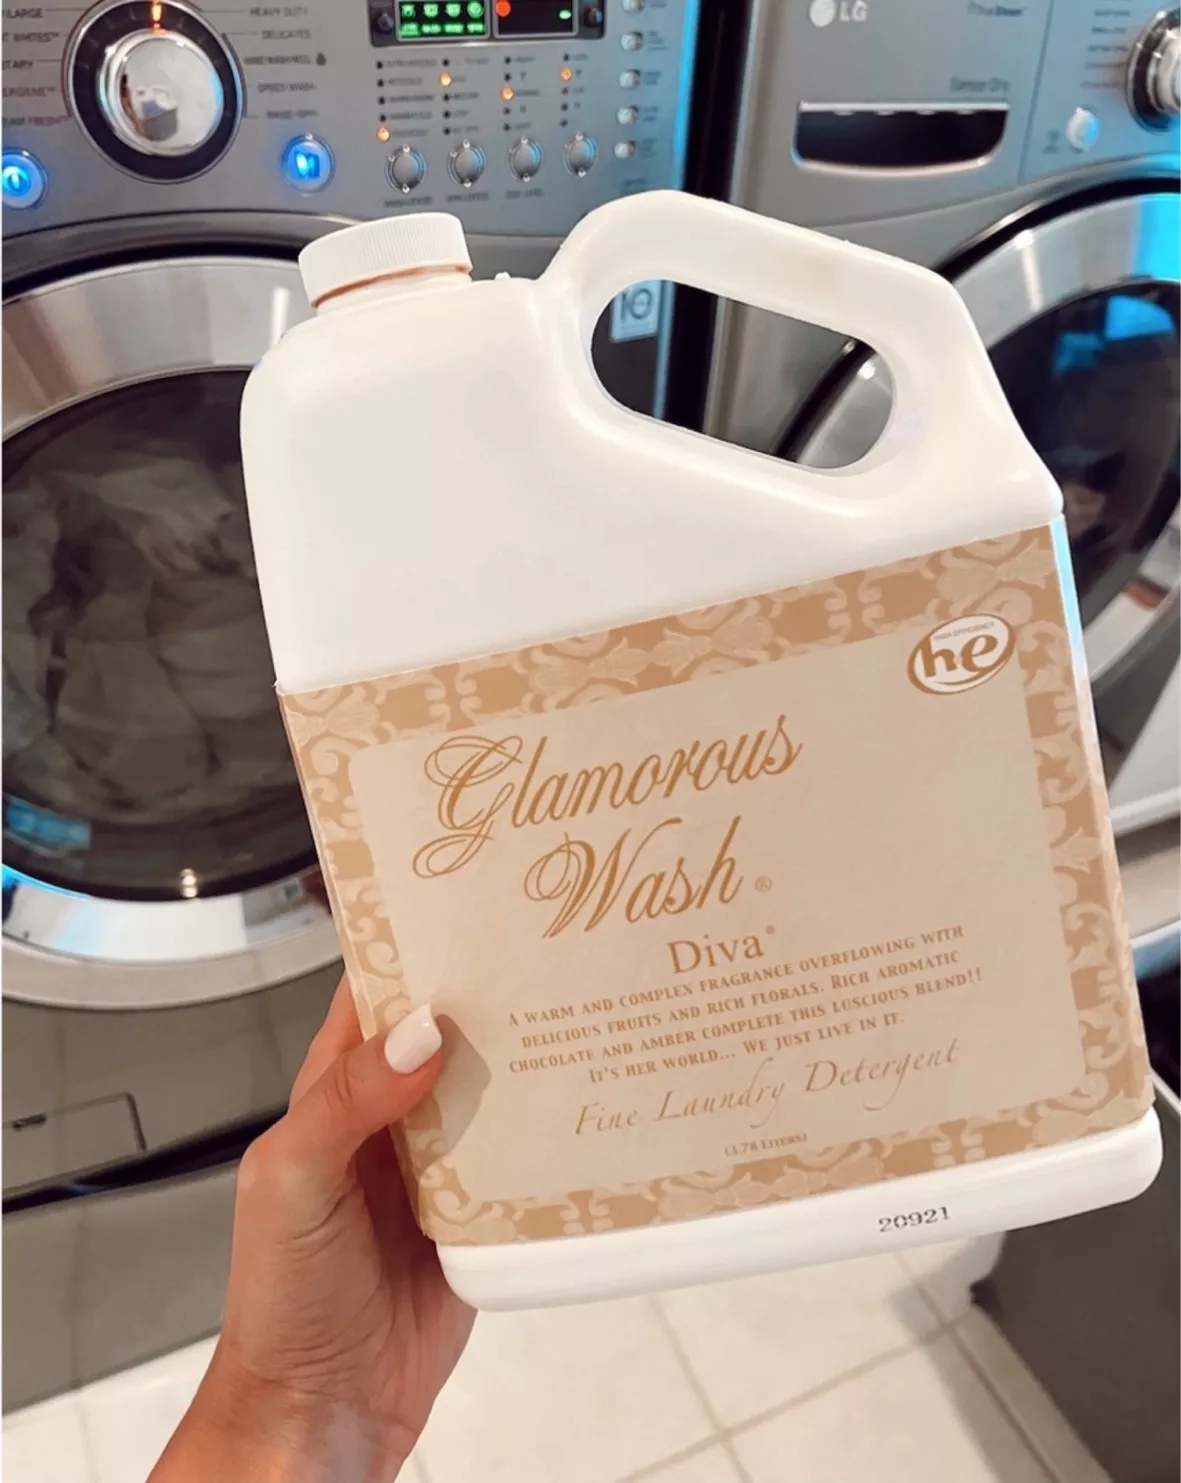 Diva 2 Gallon Set Glamorous Wash Laundry Detergent by Tyler Candles